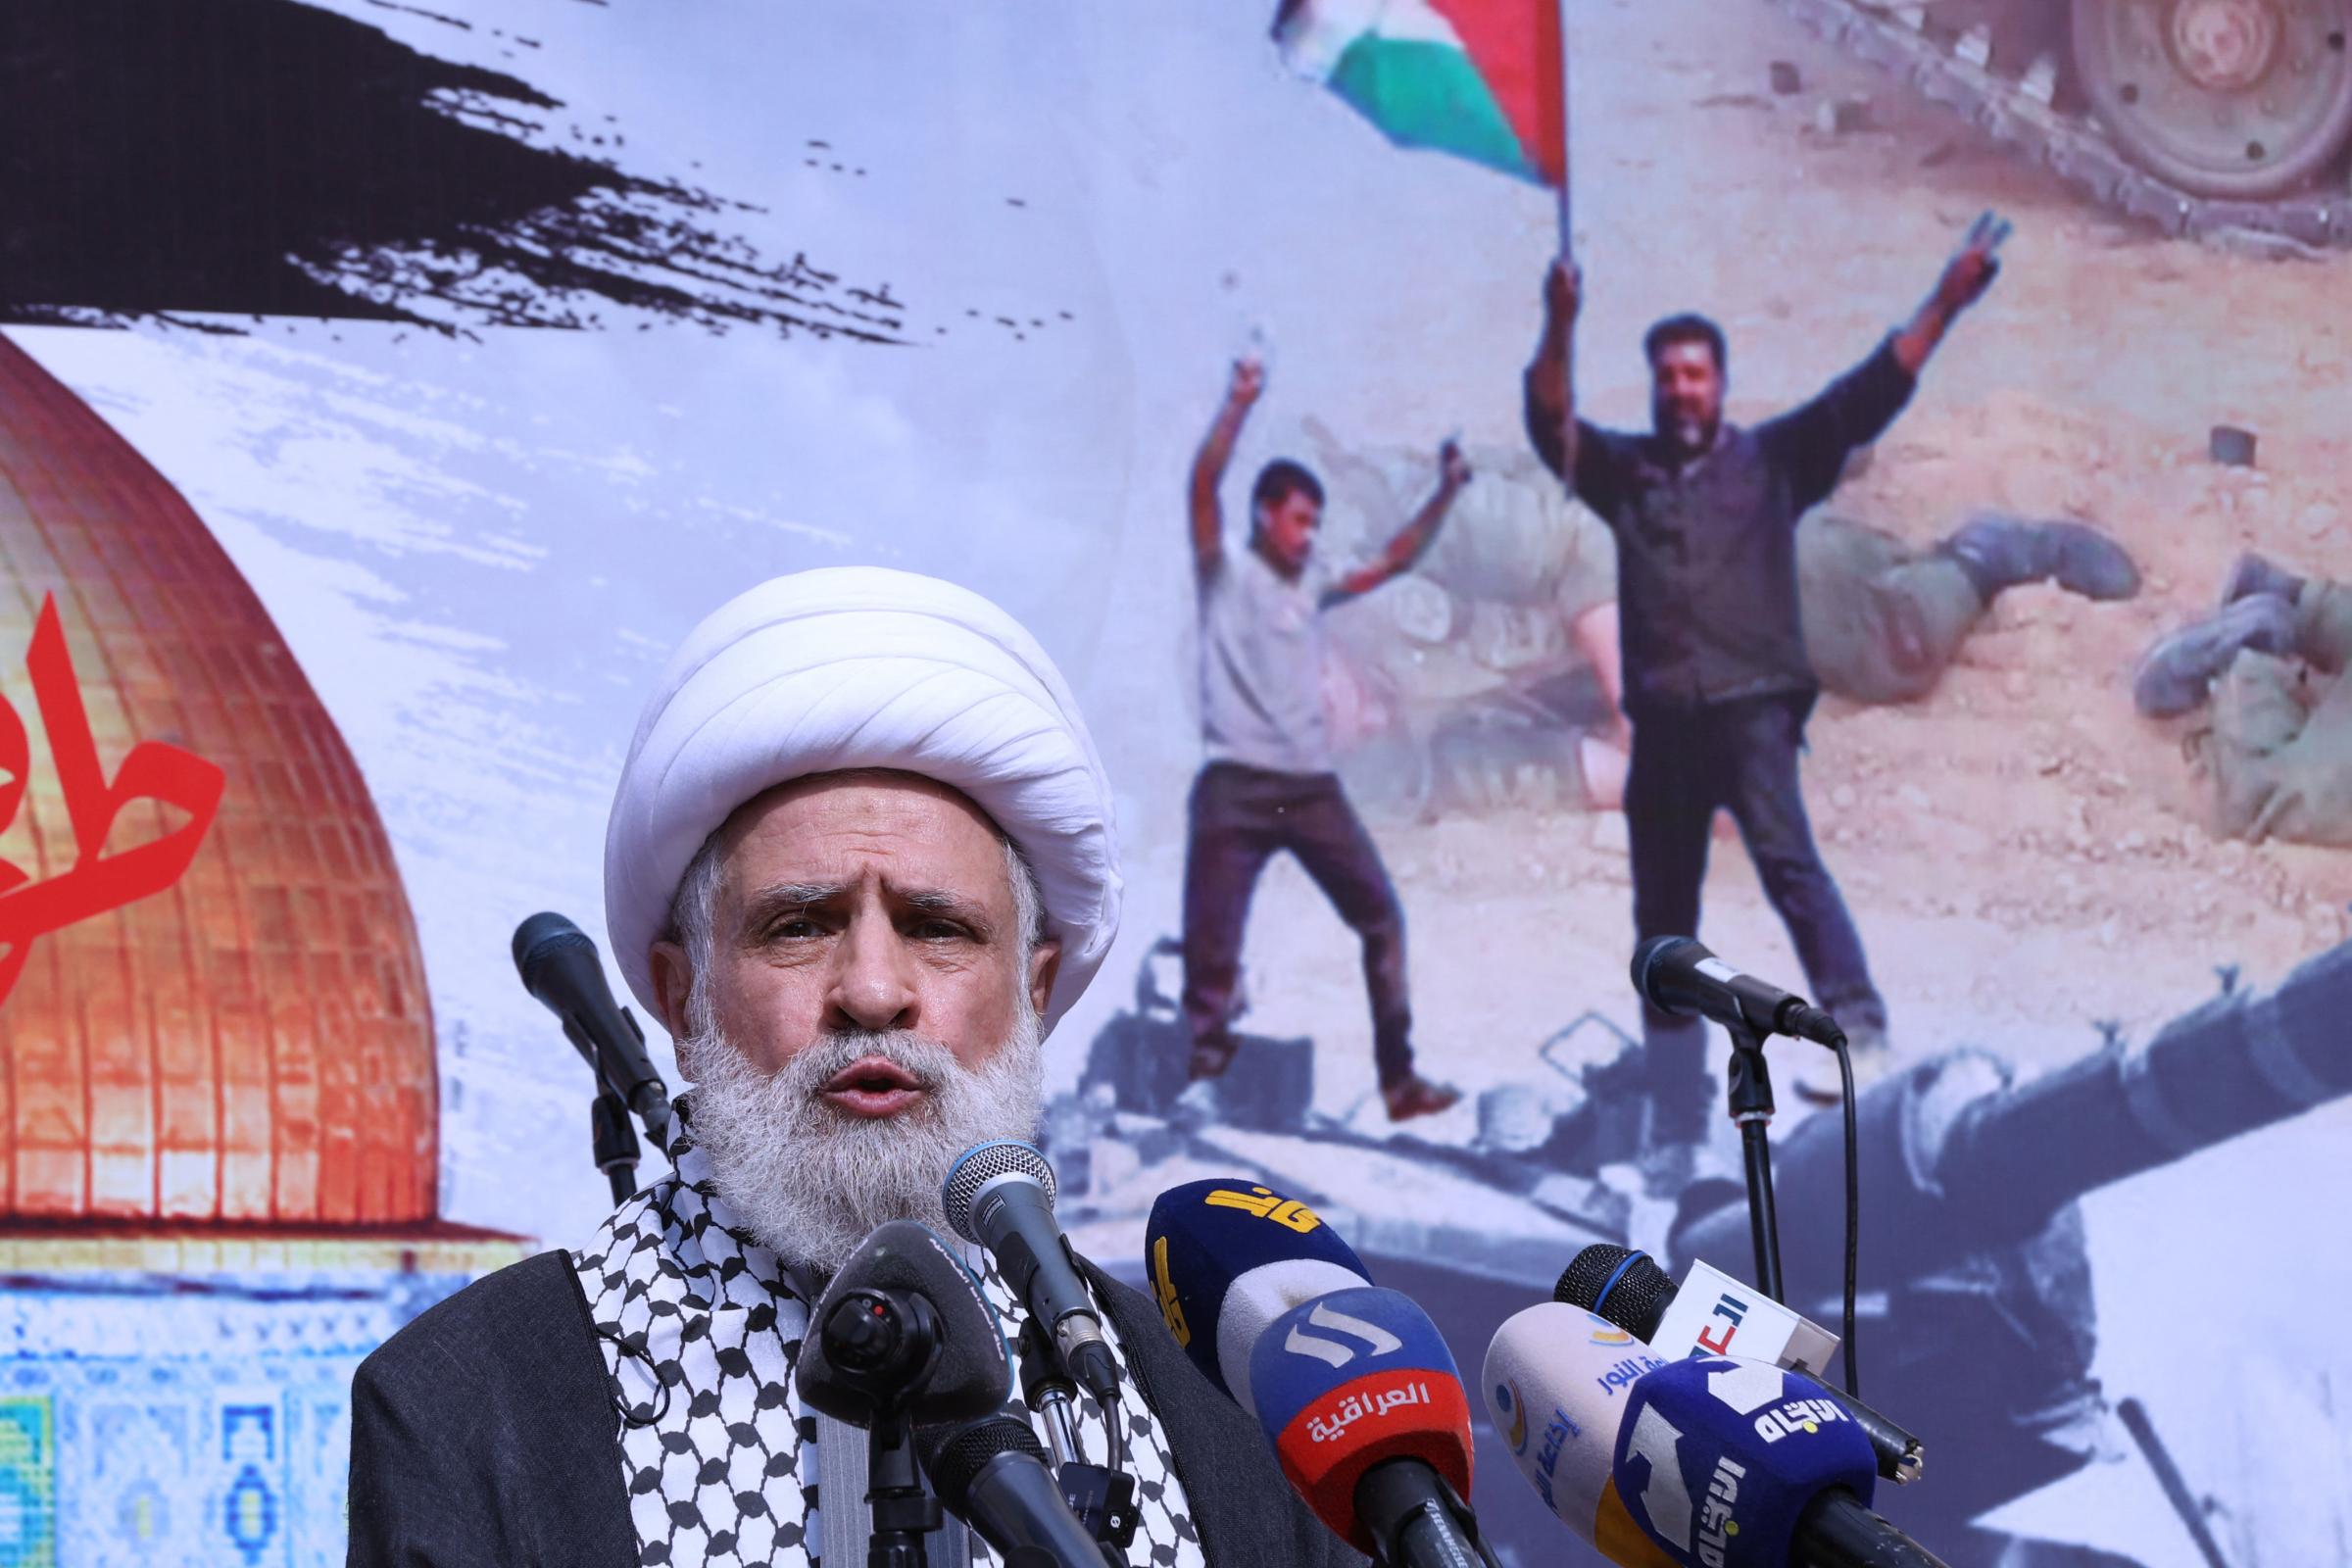 The deputy chief of Lebanons Shiite militant group Hezbollah, Sheikh Naim Qassem, delivers a speech during a rally in Beirut on October 13, 2023, as thousands of protesters poured onto the streets of several Middle East capitals in support of